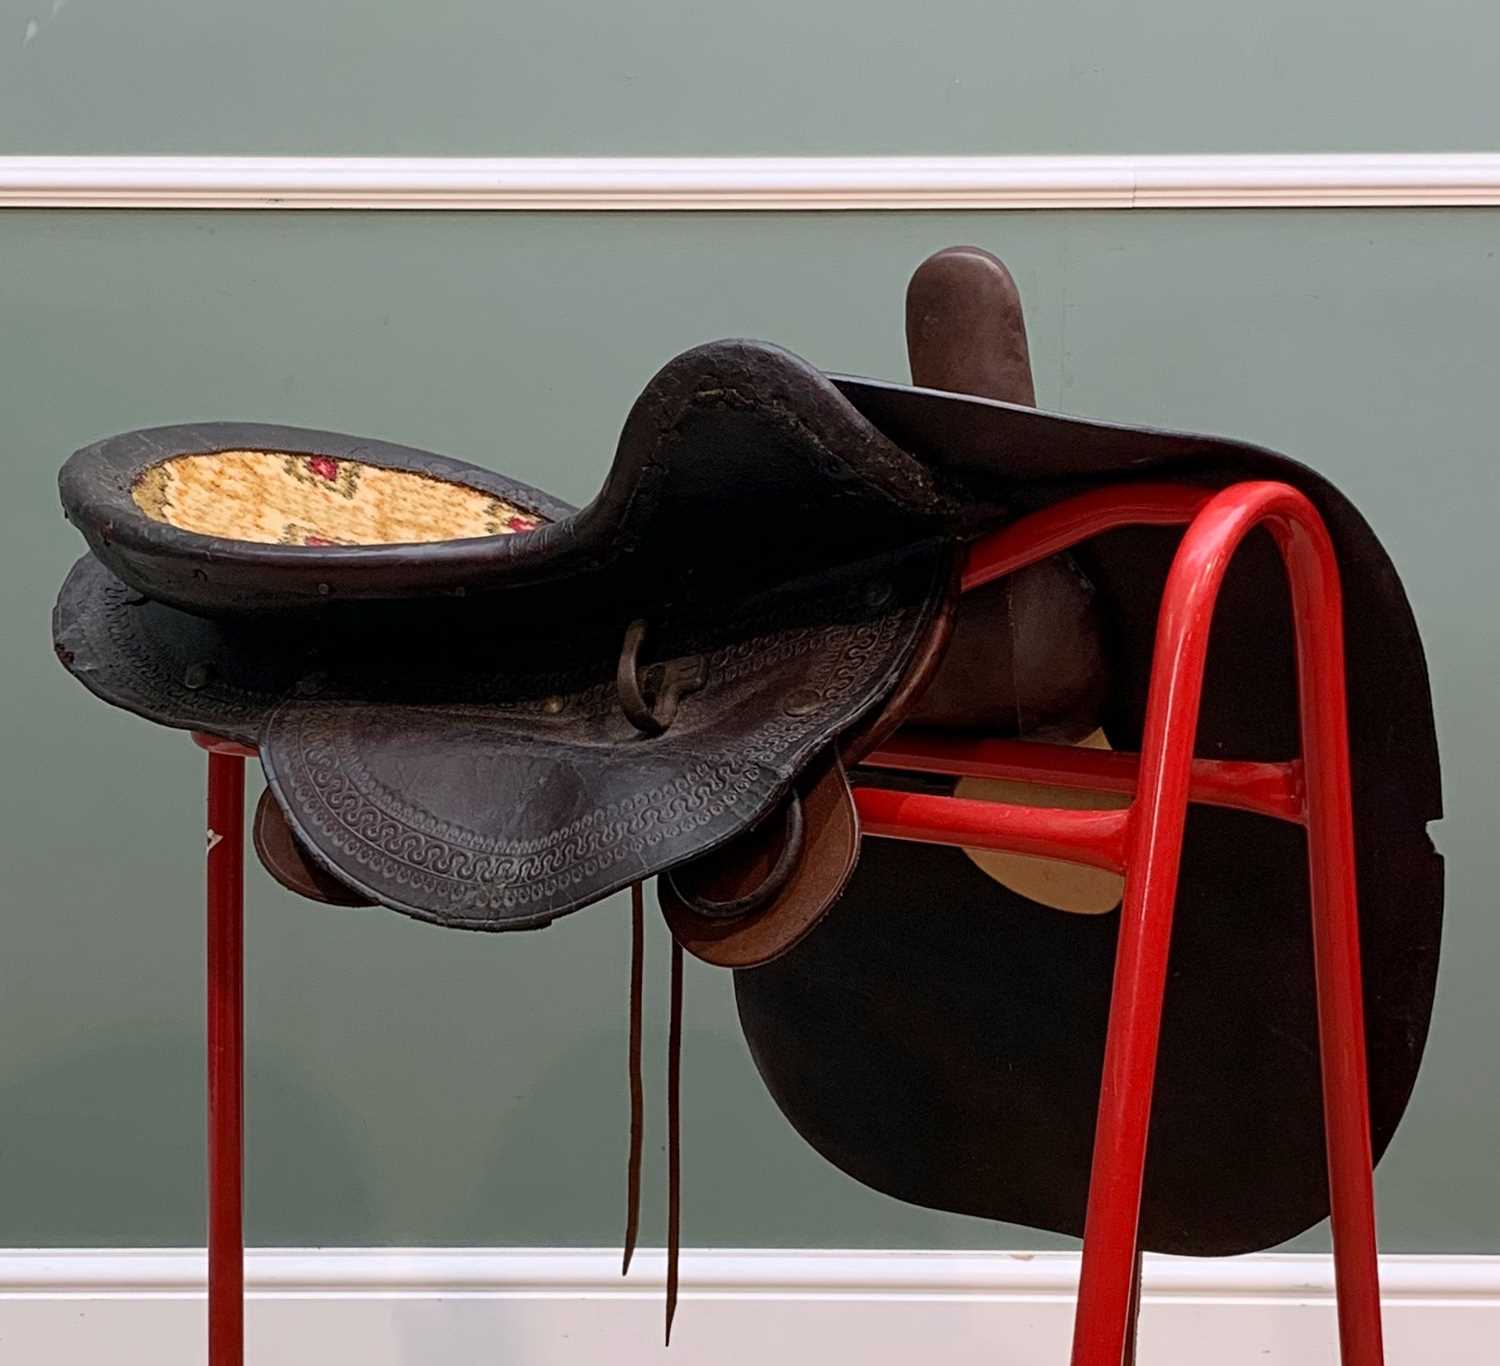 THE EQUESTRIAN CLUB HOUSE: TEXAS SIDE SADDLE, c. 1880, tooled leather and carpet seat, 66cms long - Image 5 of 5